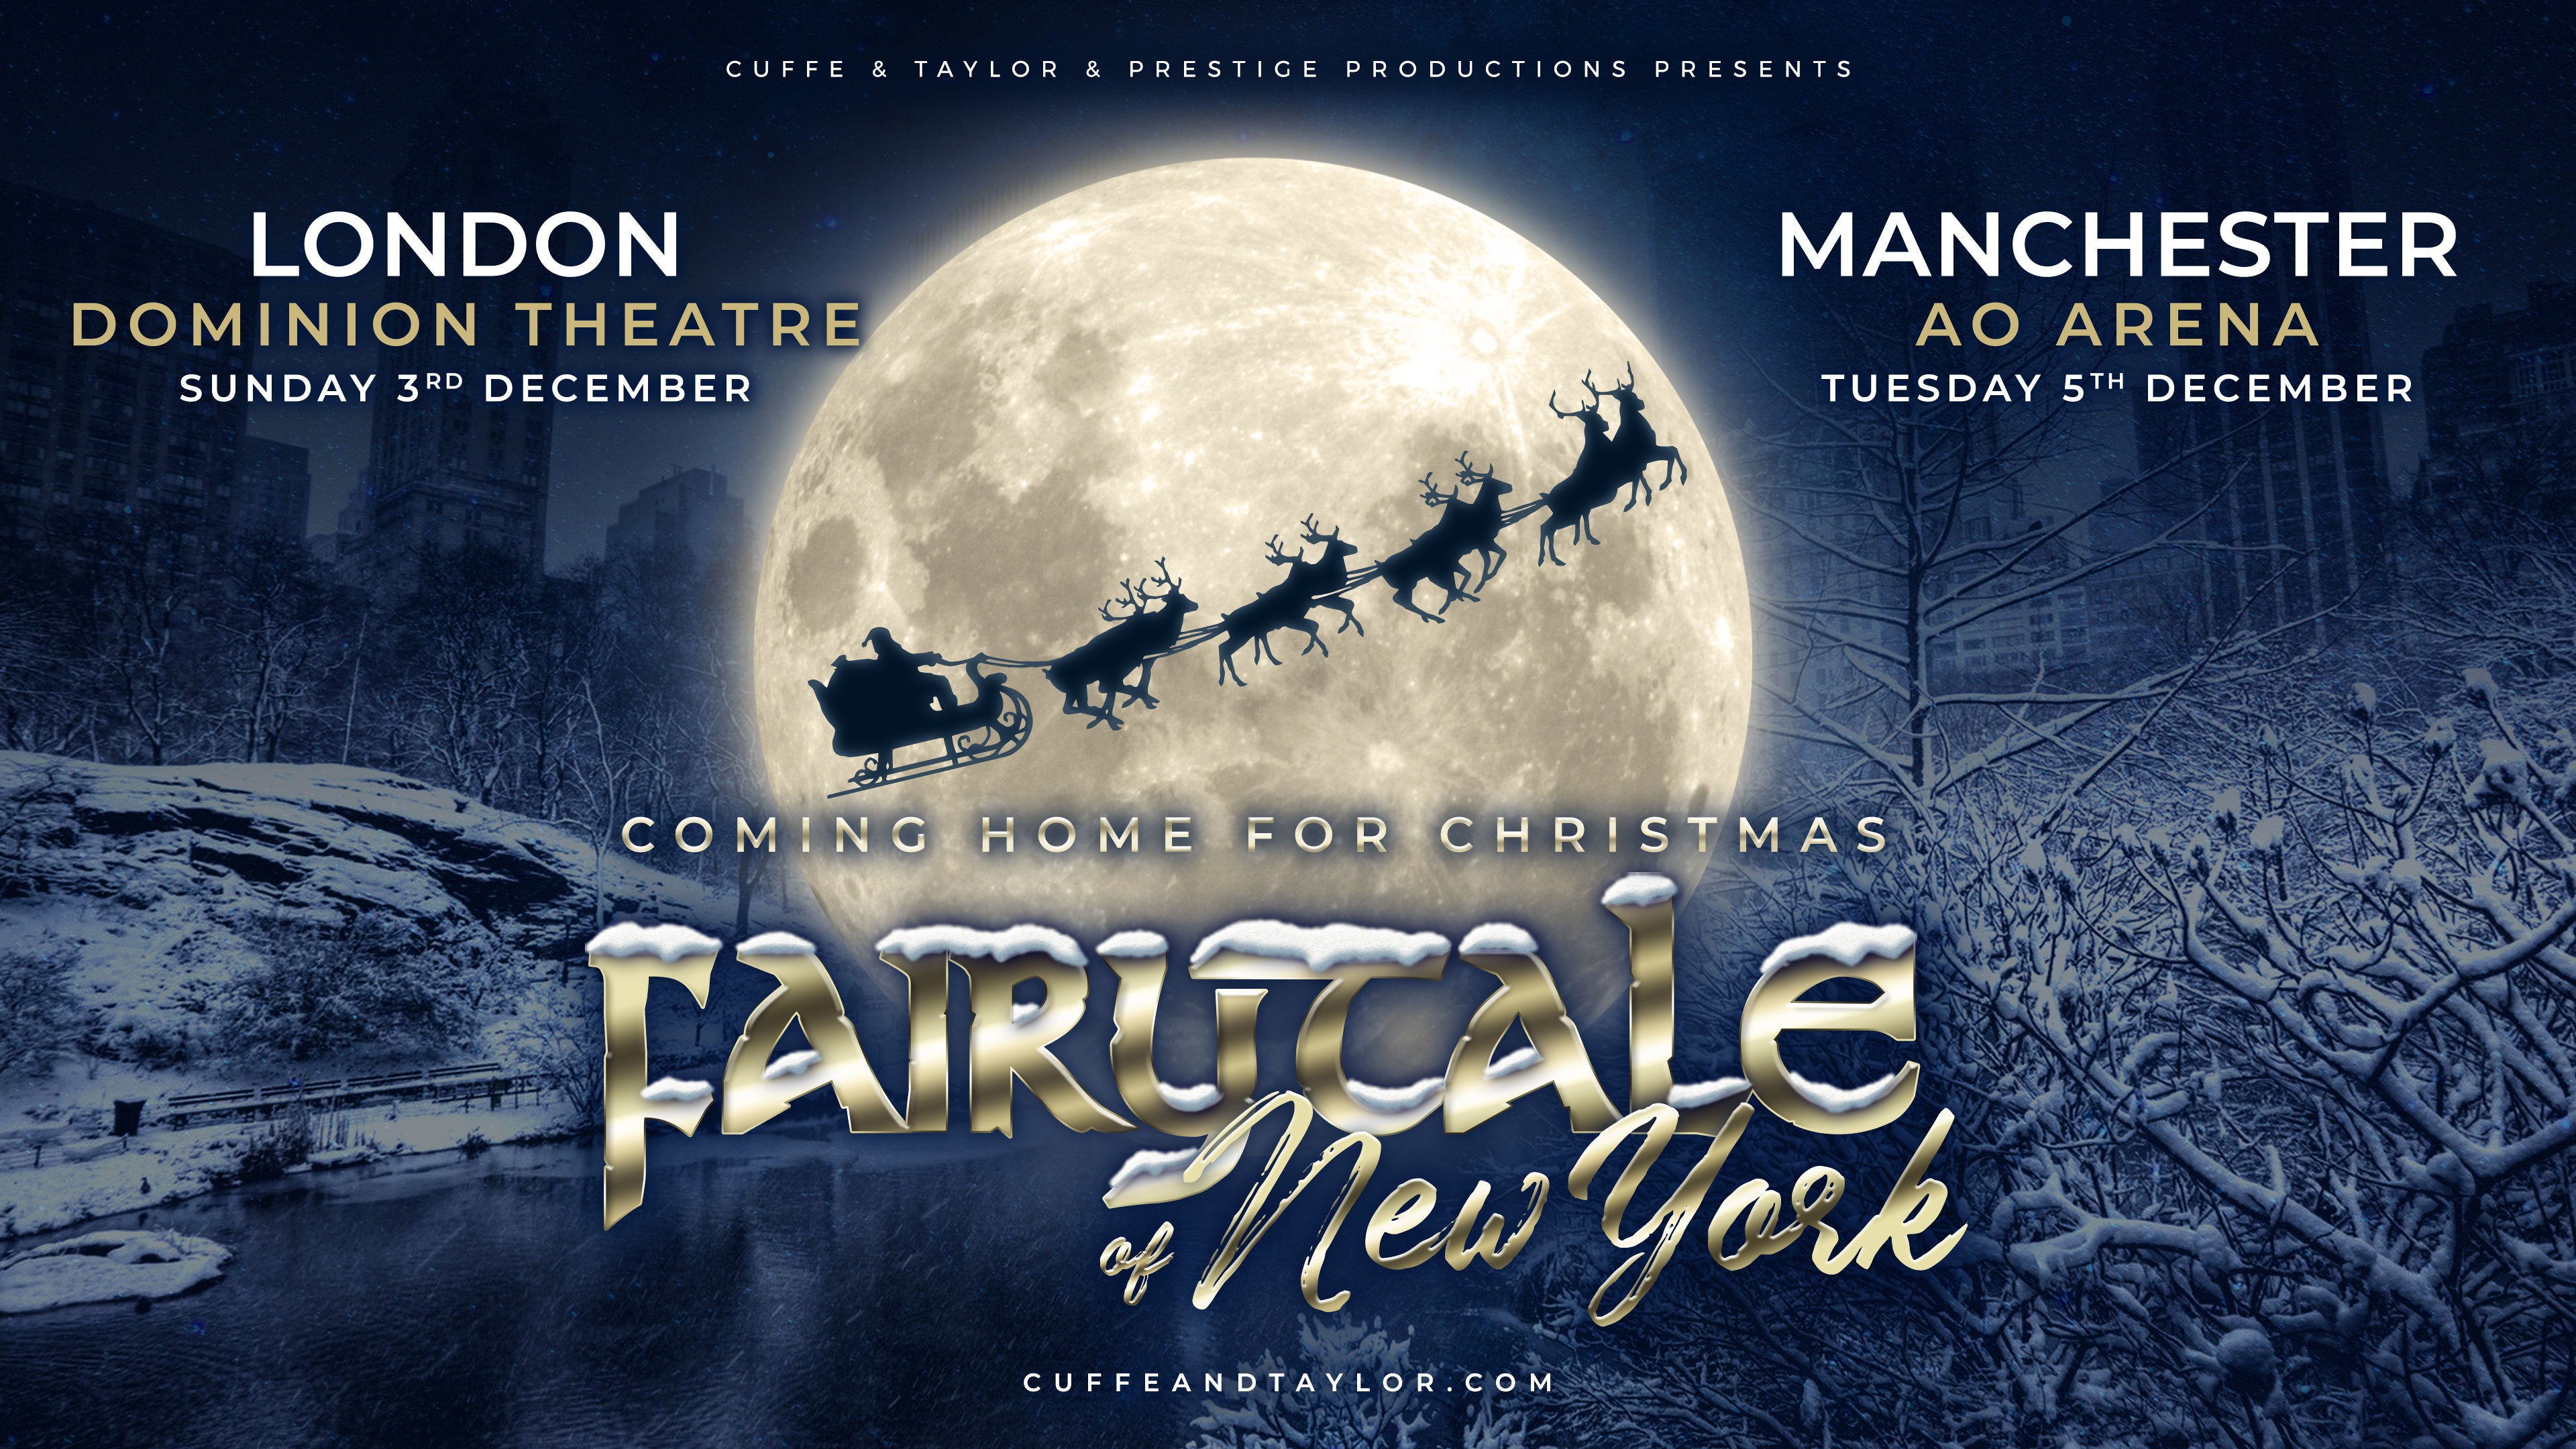 Fairytale of New York in Manchester promo photo for Artist presale offer code